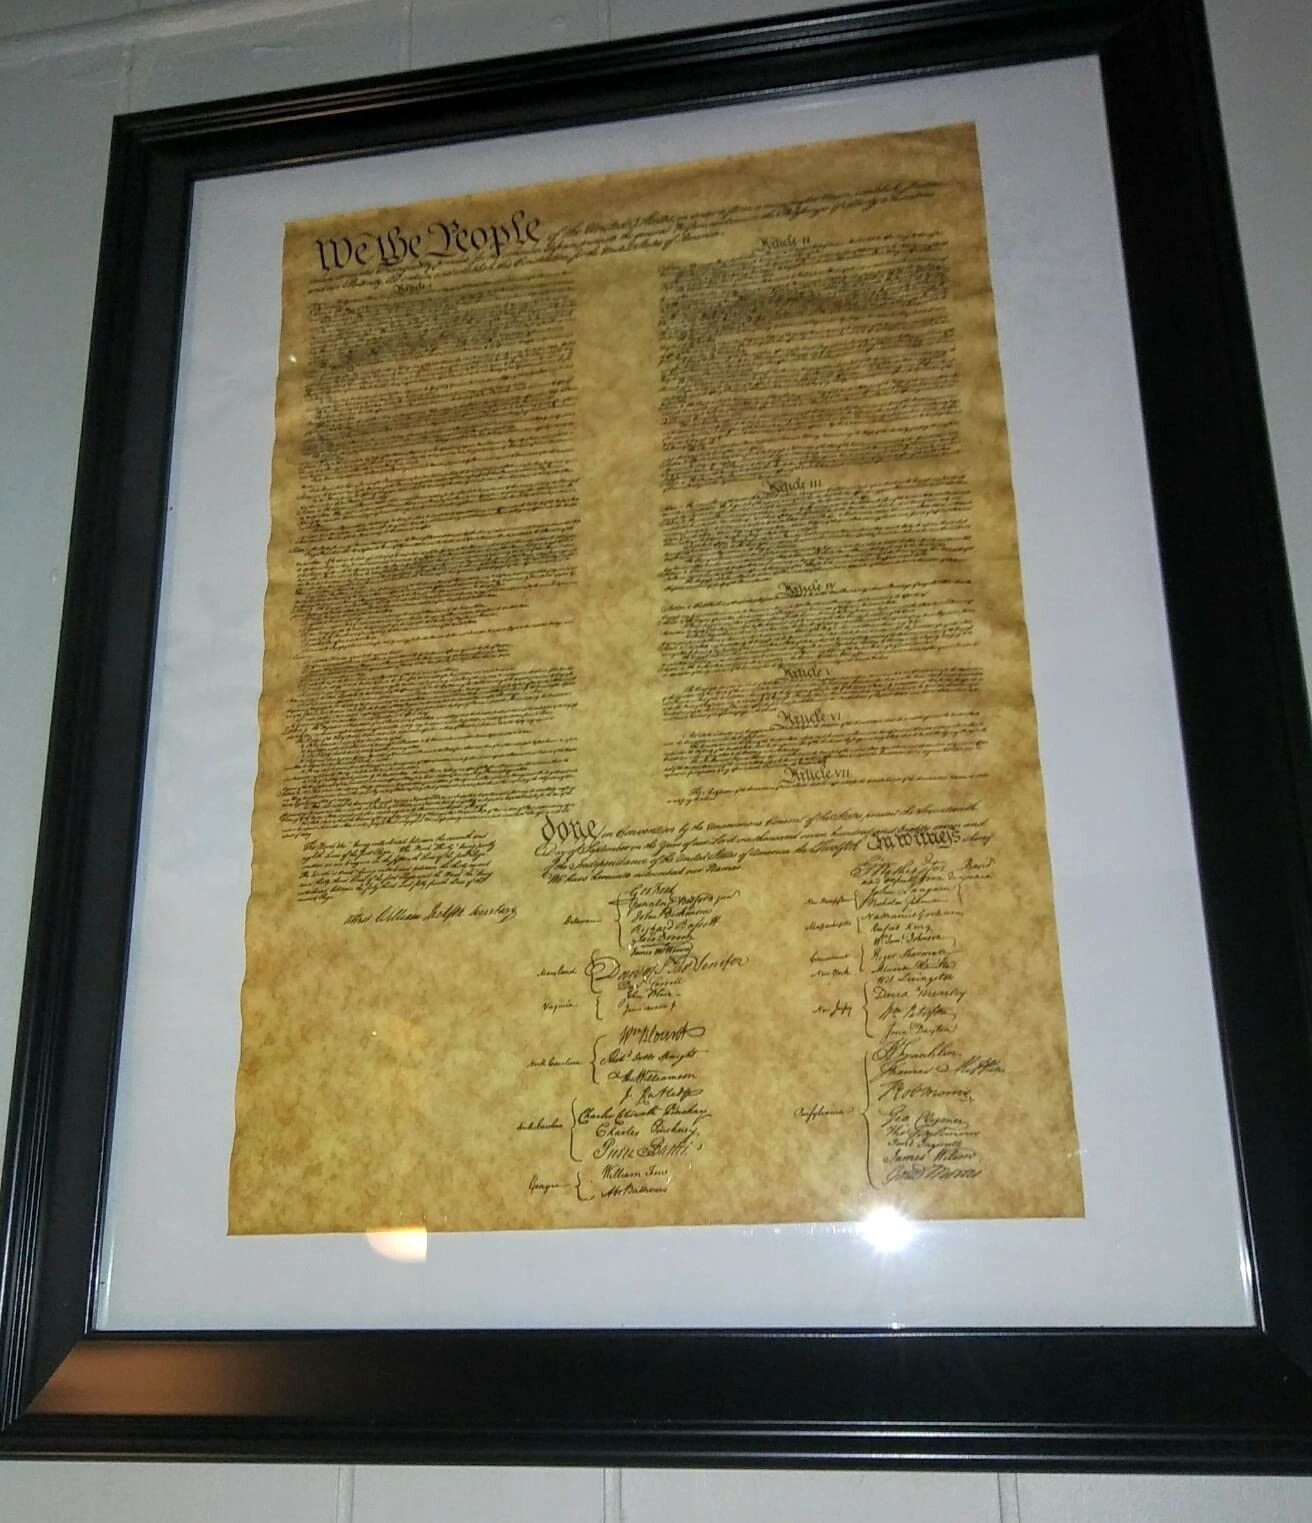 Three Documents of Freedom Constitution Declaration of Independence Billof Right